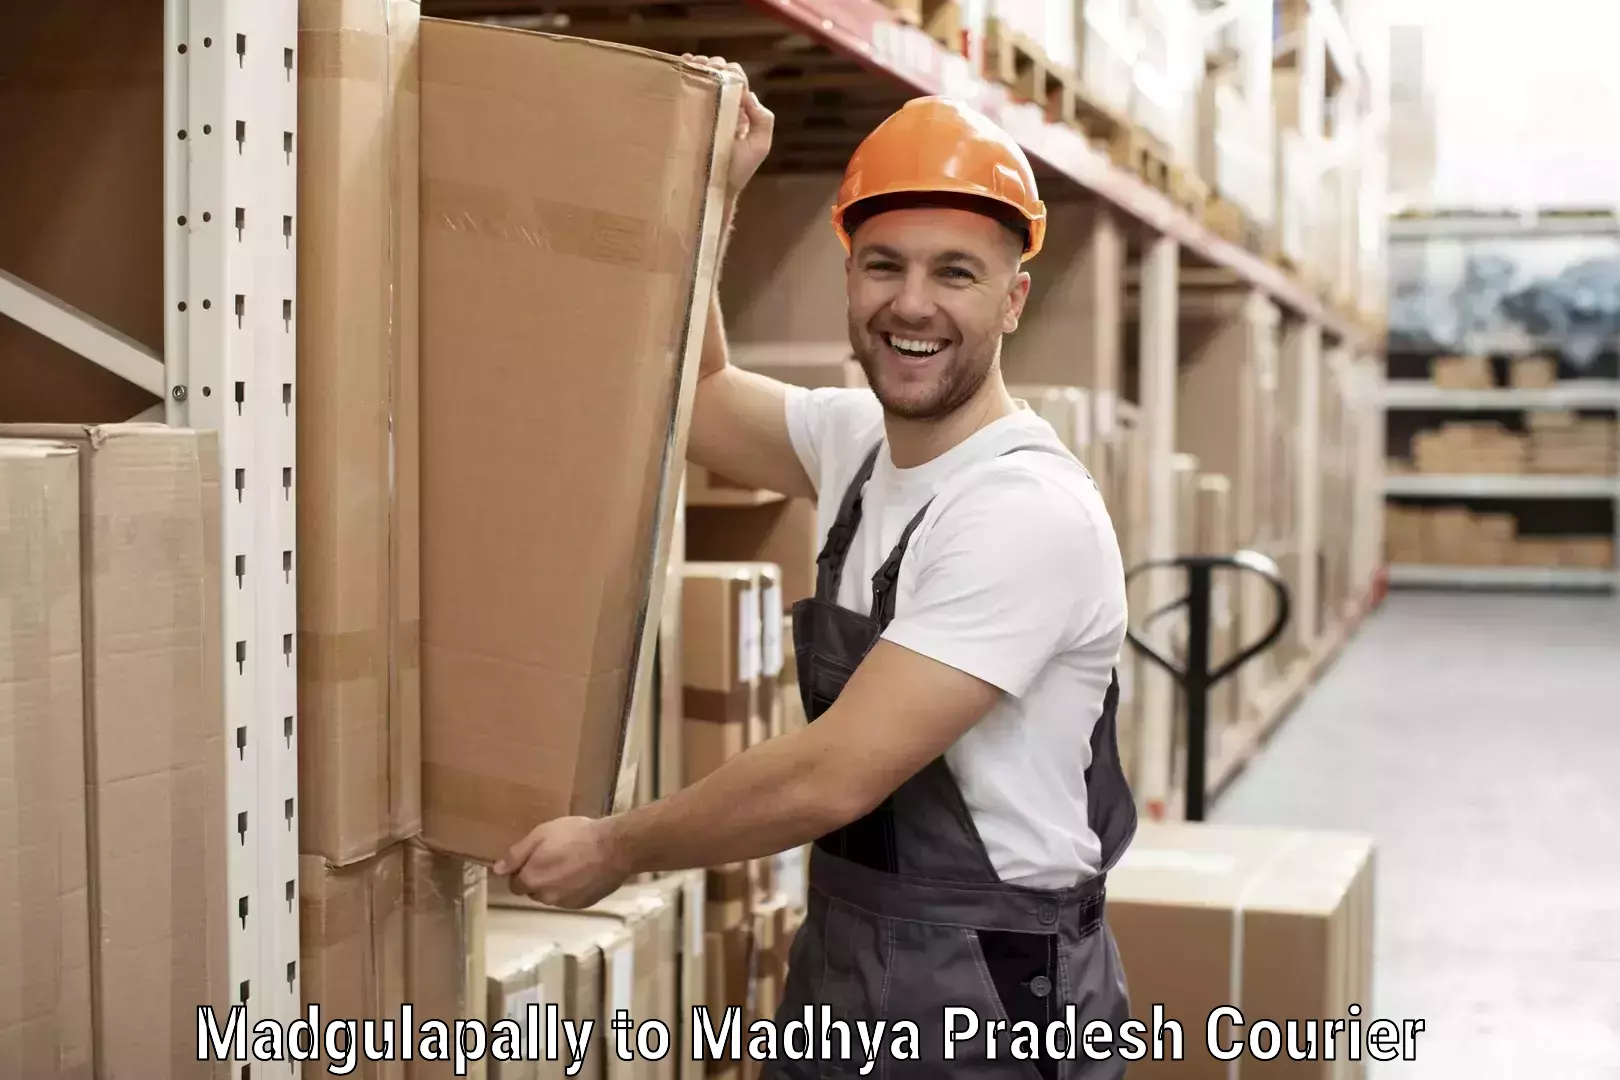 Next-generation courier services Madgulapally to Mandideep